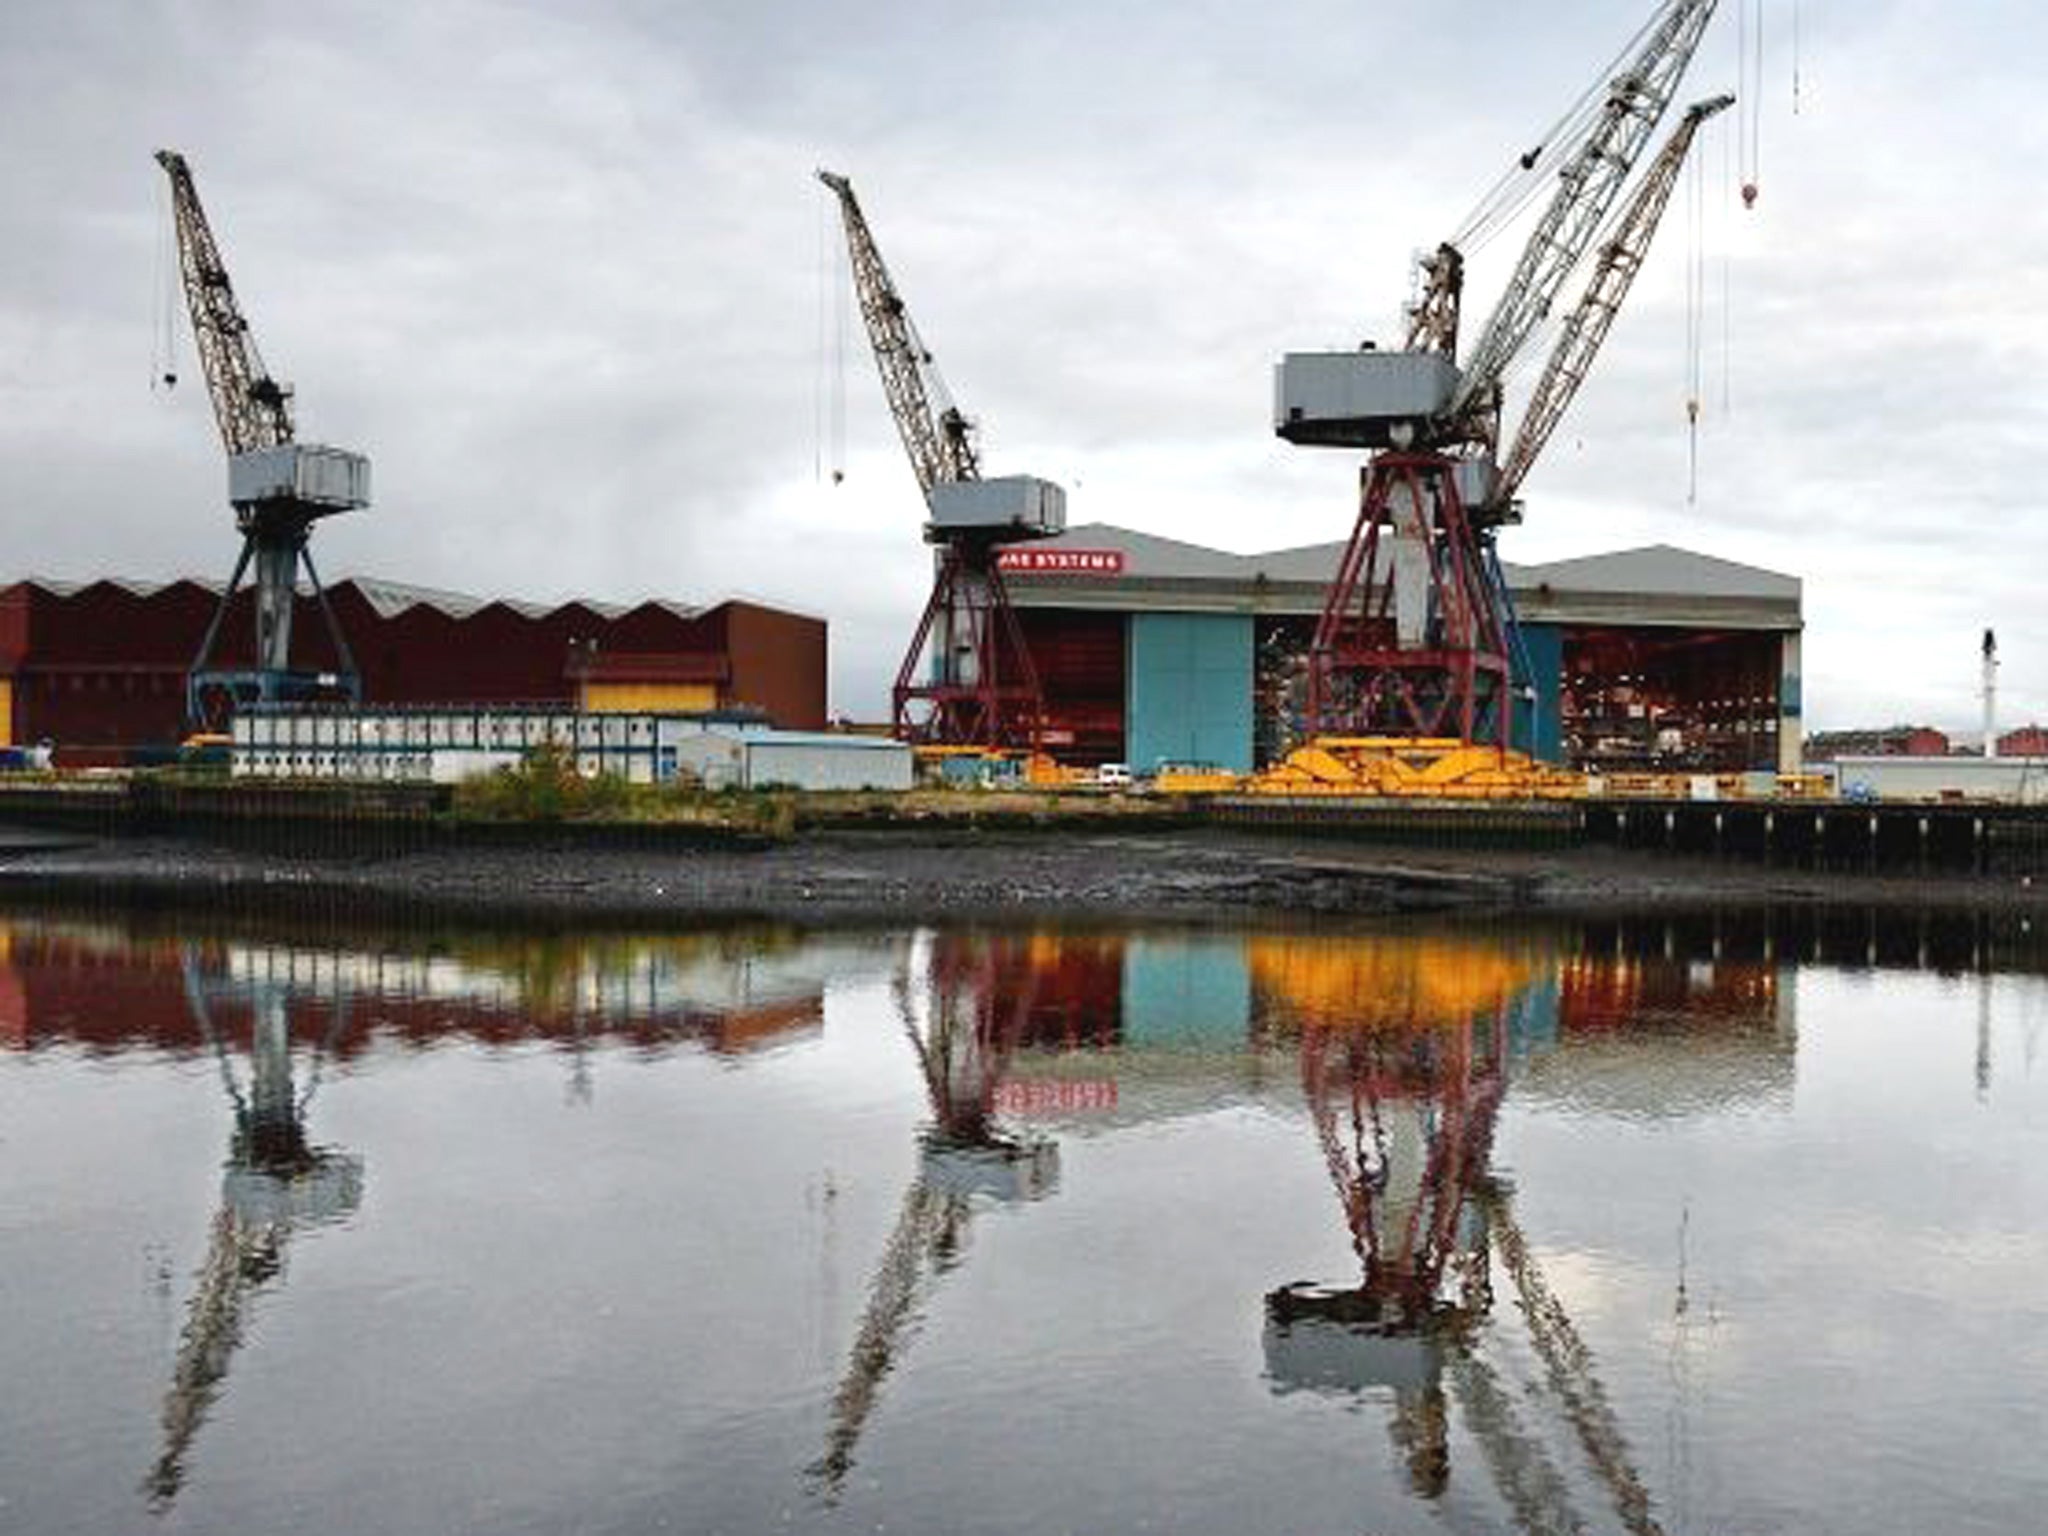 A general view of the BAE systems yard at Govan on the Clyde